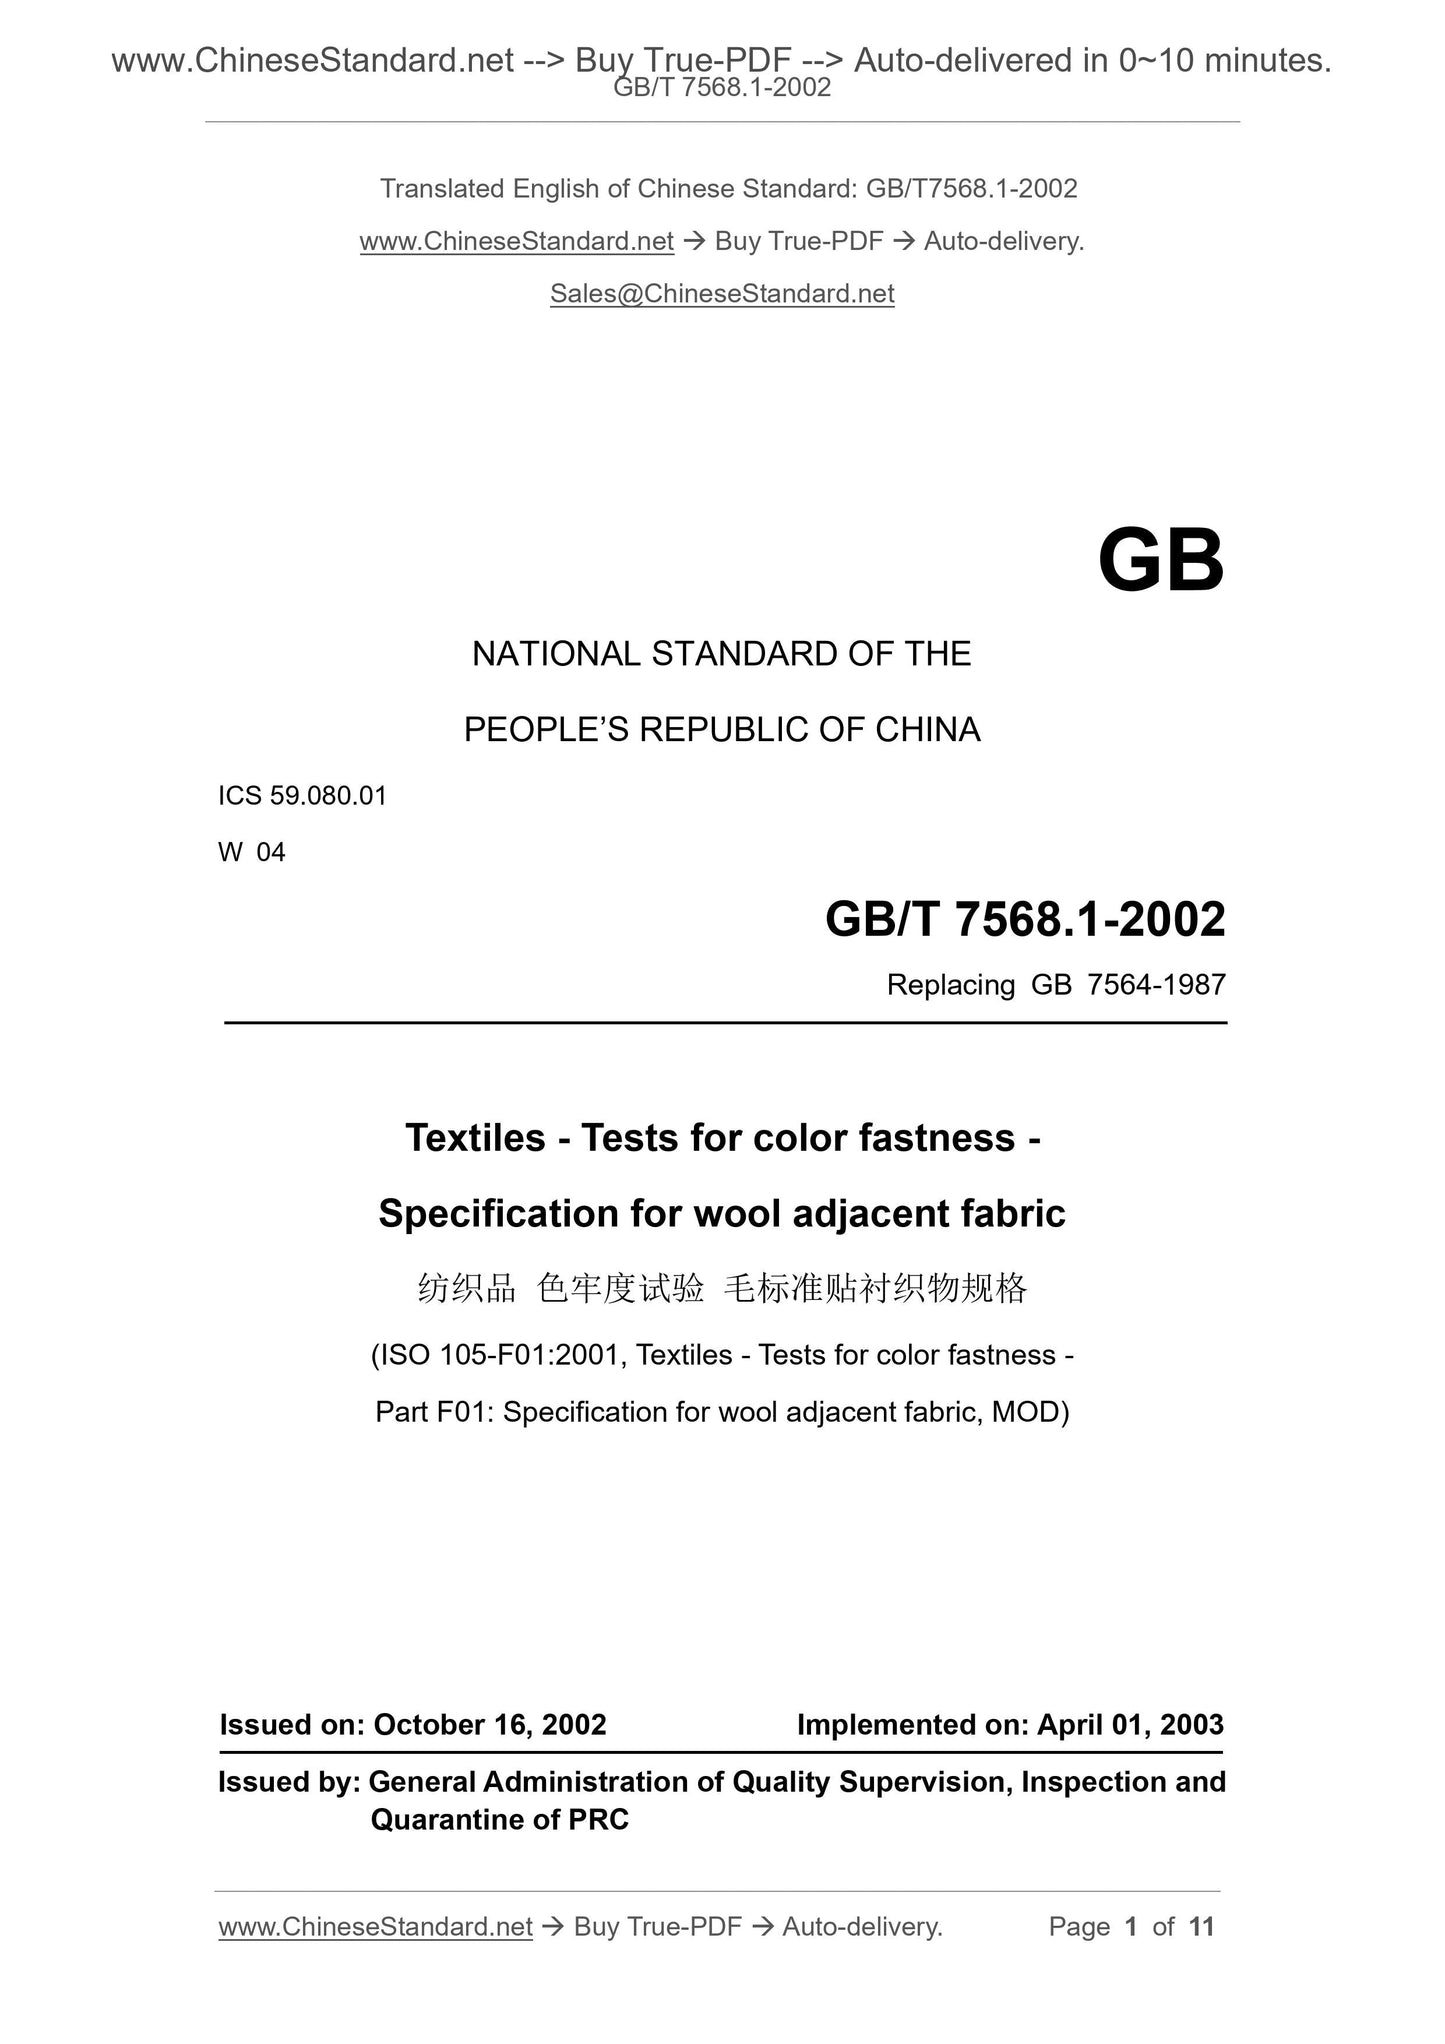 GB/T 7568.1-2002 Page 1